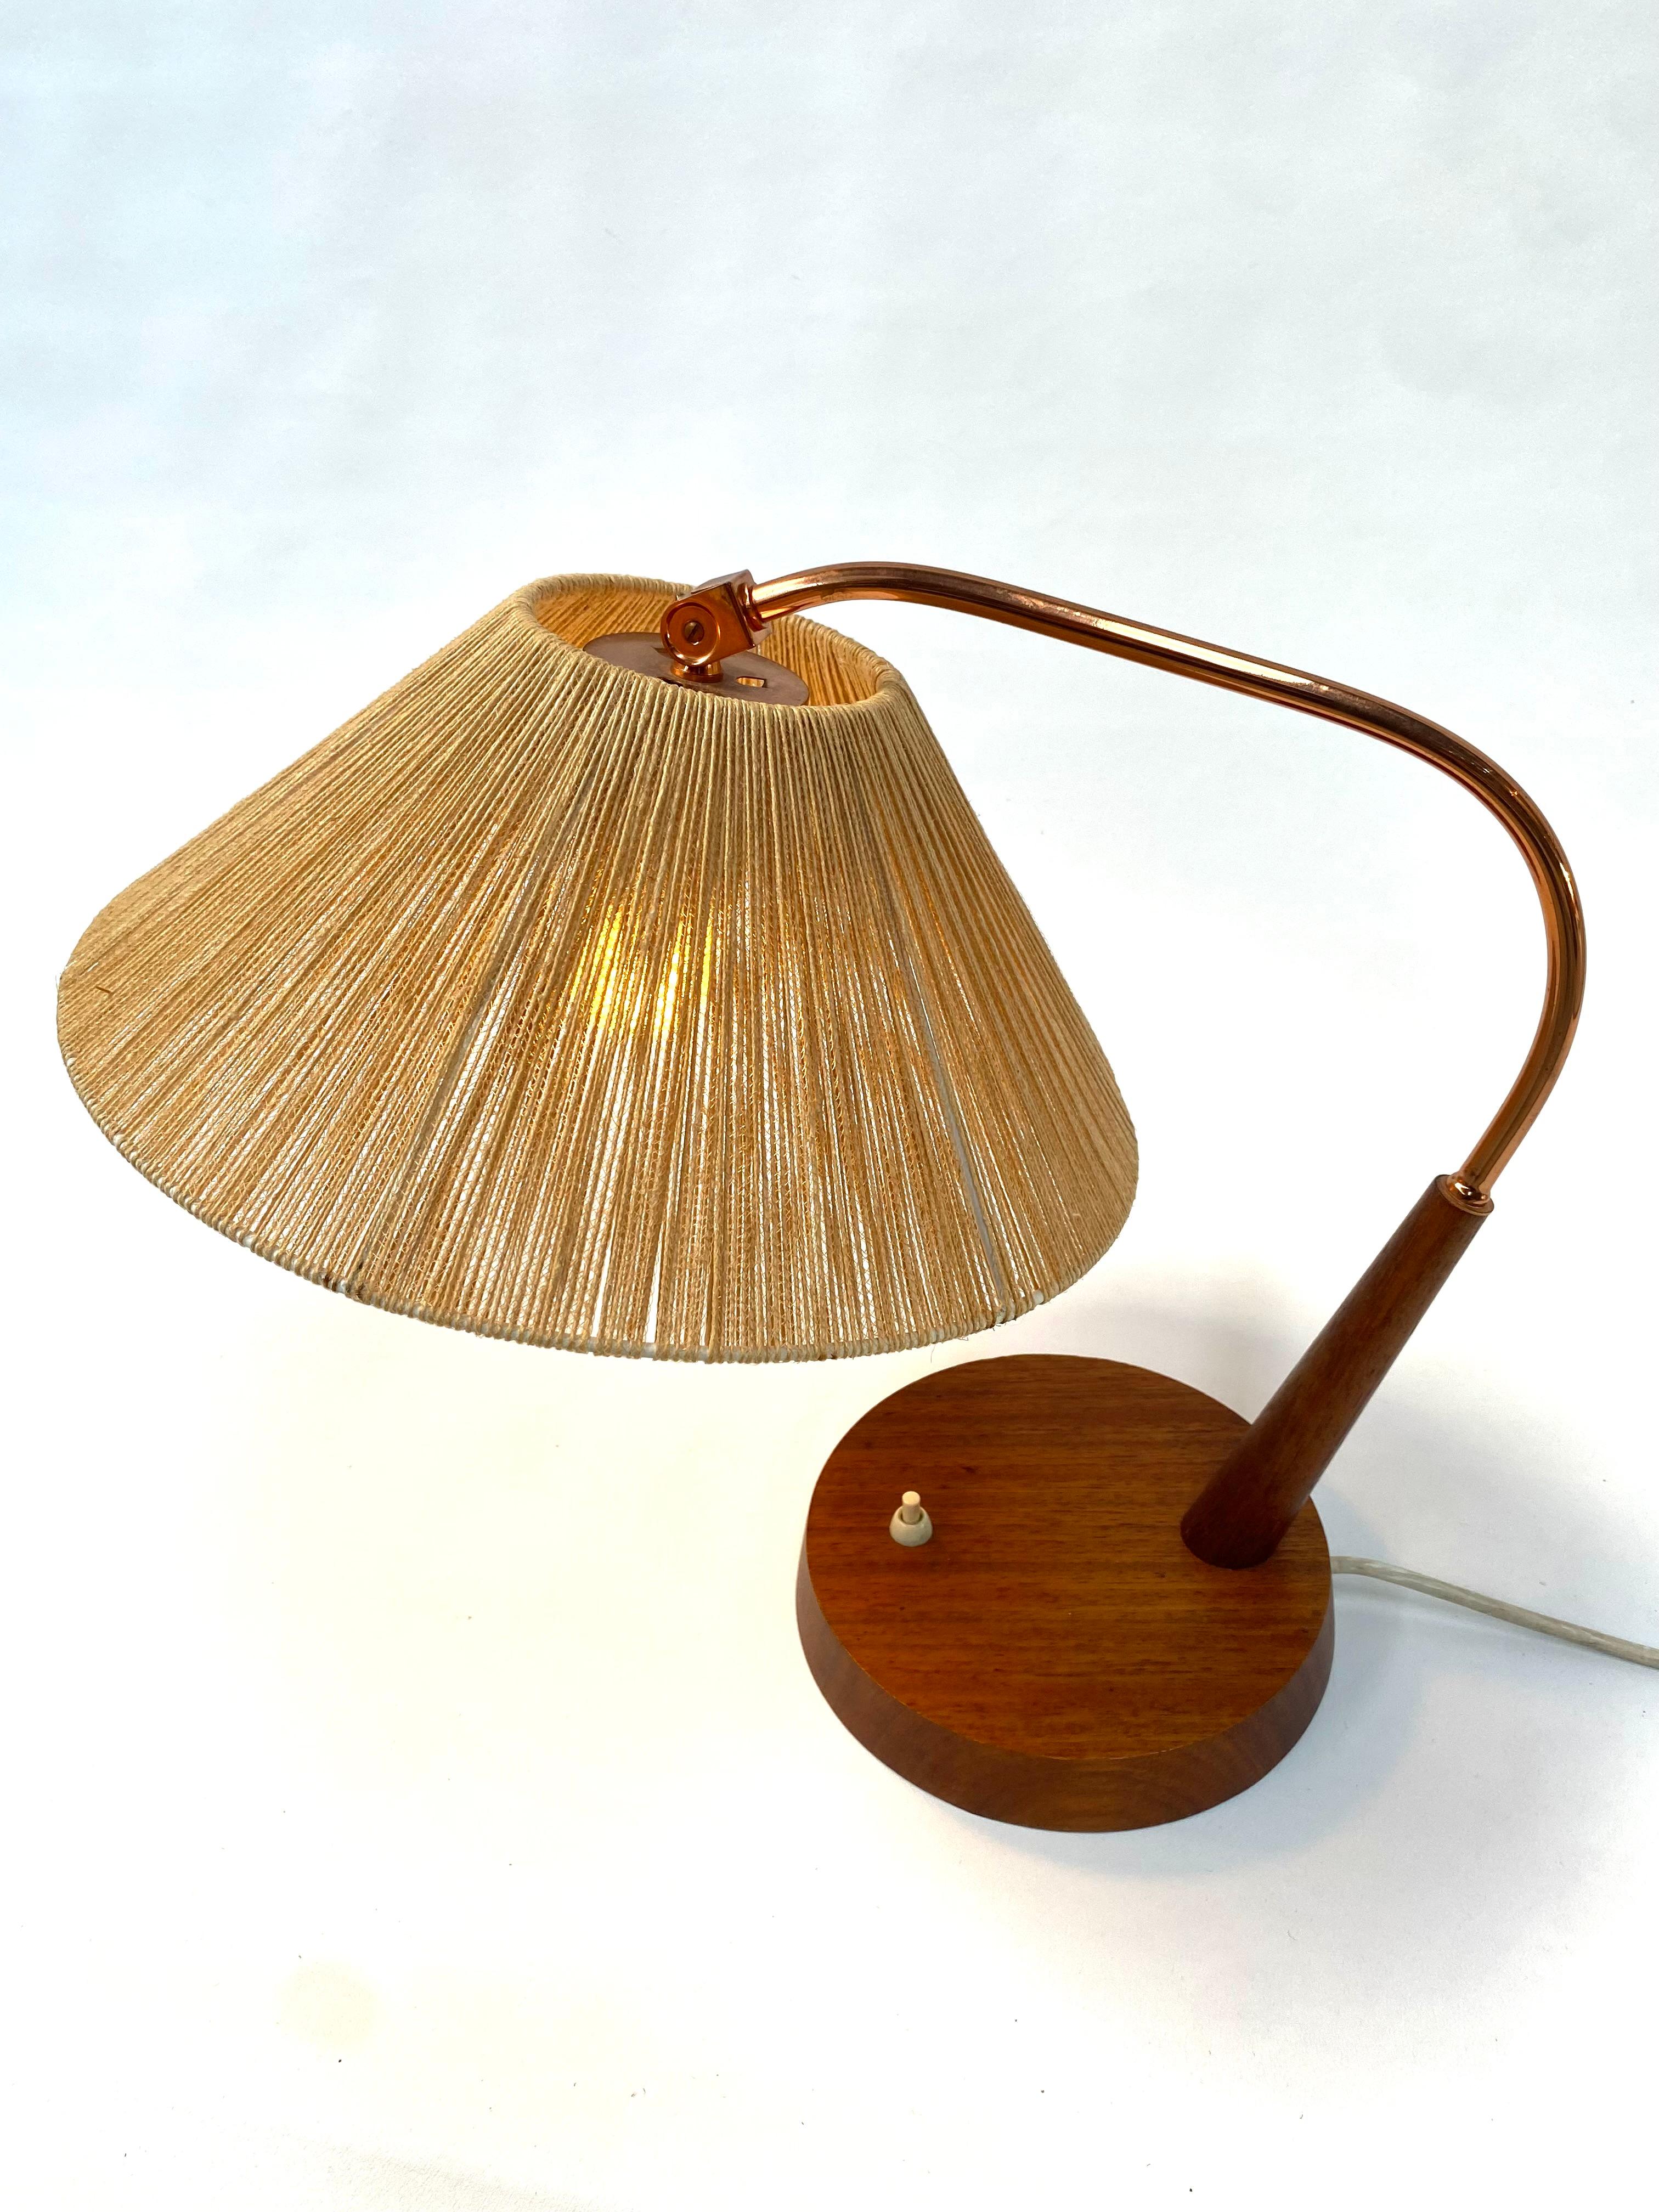 A stunnishing Danish table lamp made of teak, brass and sisal. Designed and manufactured in Switzerland by Temde Leuchten in the sixtiesby Temde in Switzerland. The sisal lampshade in combination with a E27 (US E26) light bulb creates a beautyfull